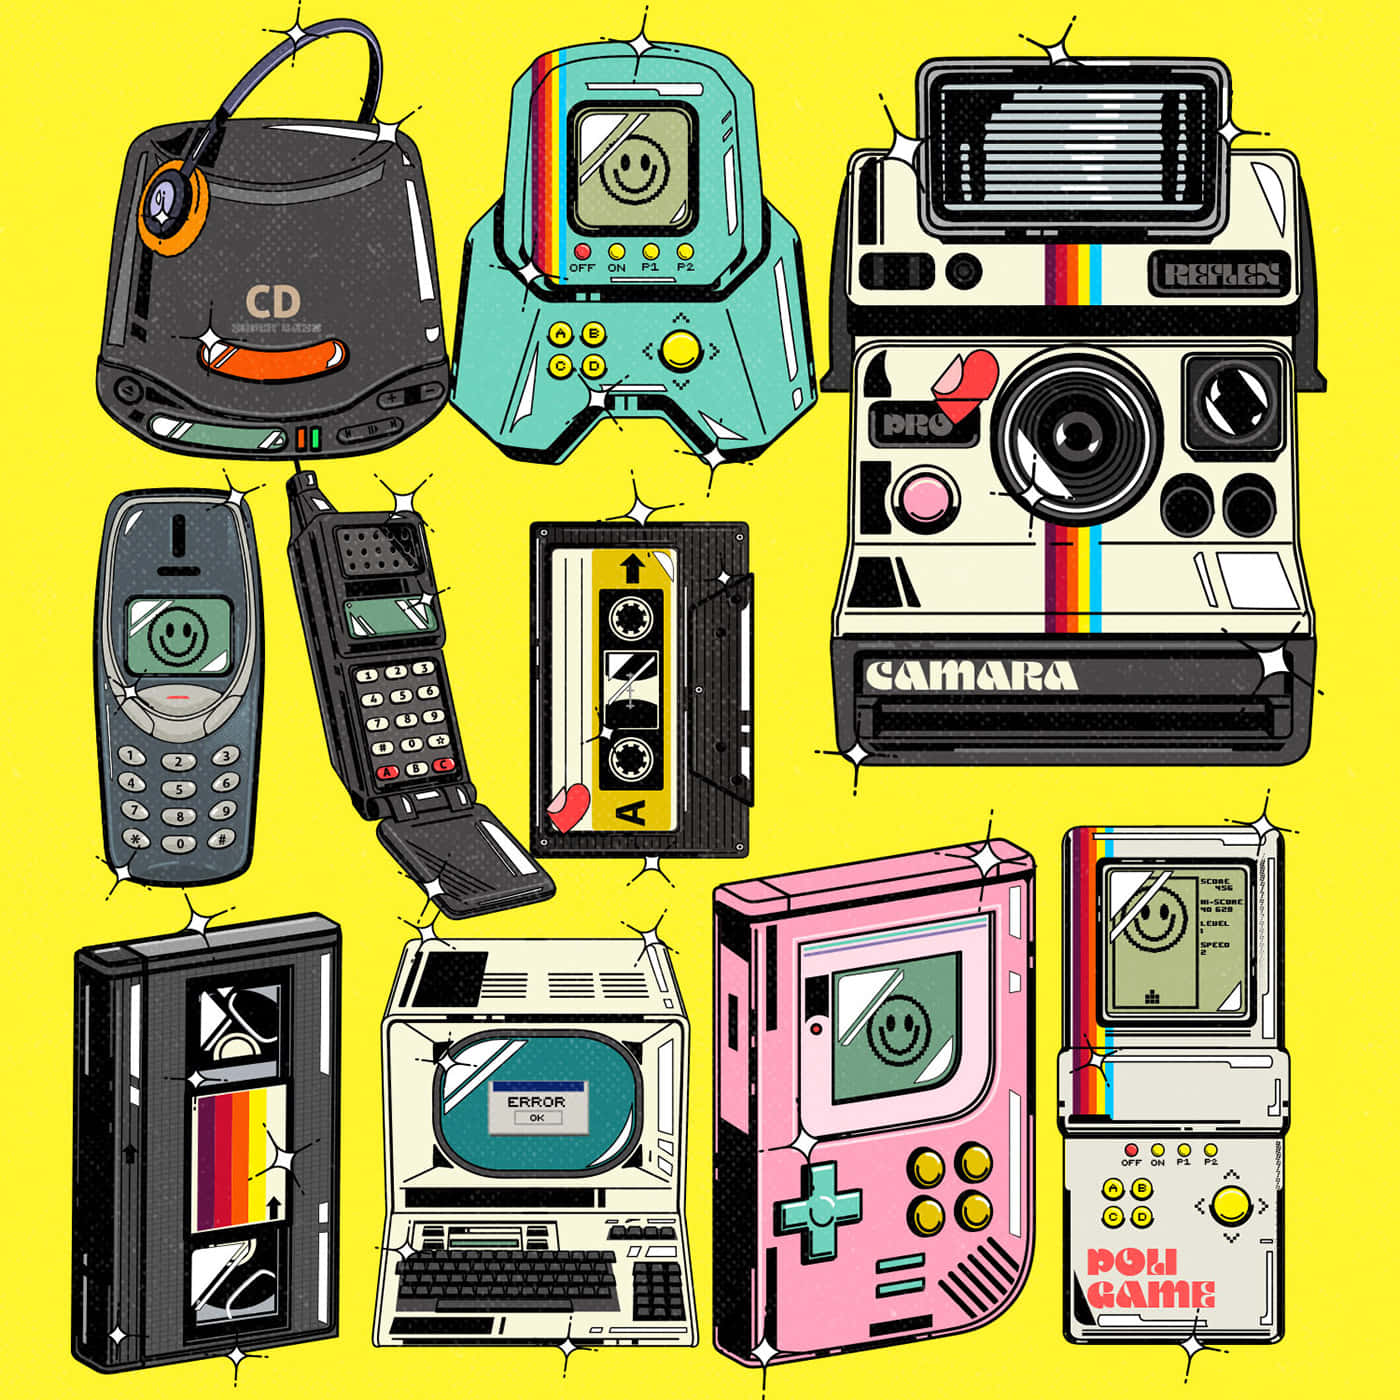 Download 90s Aesthetic Technology Gadgets Wallpaper